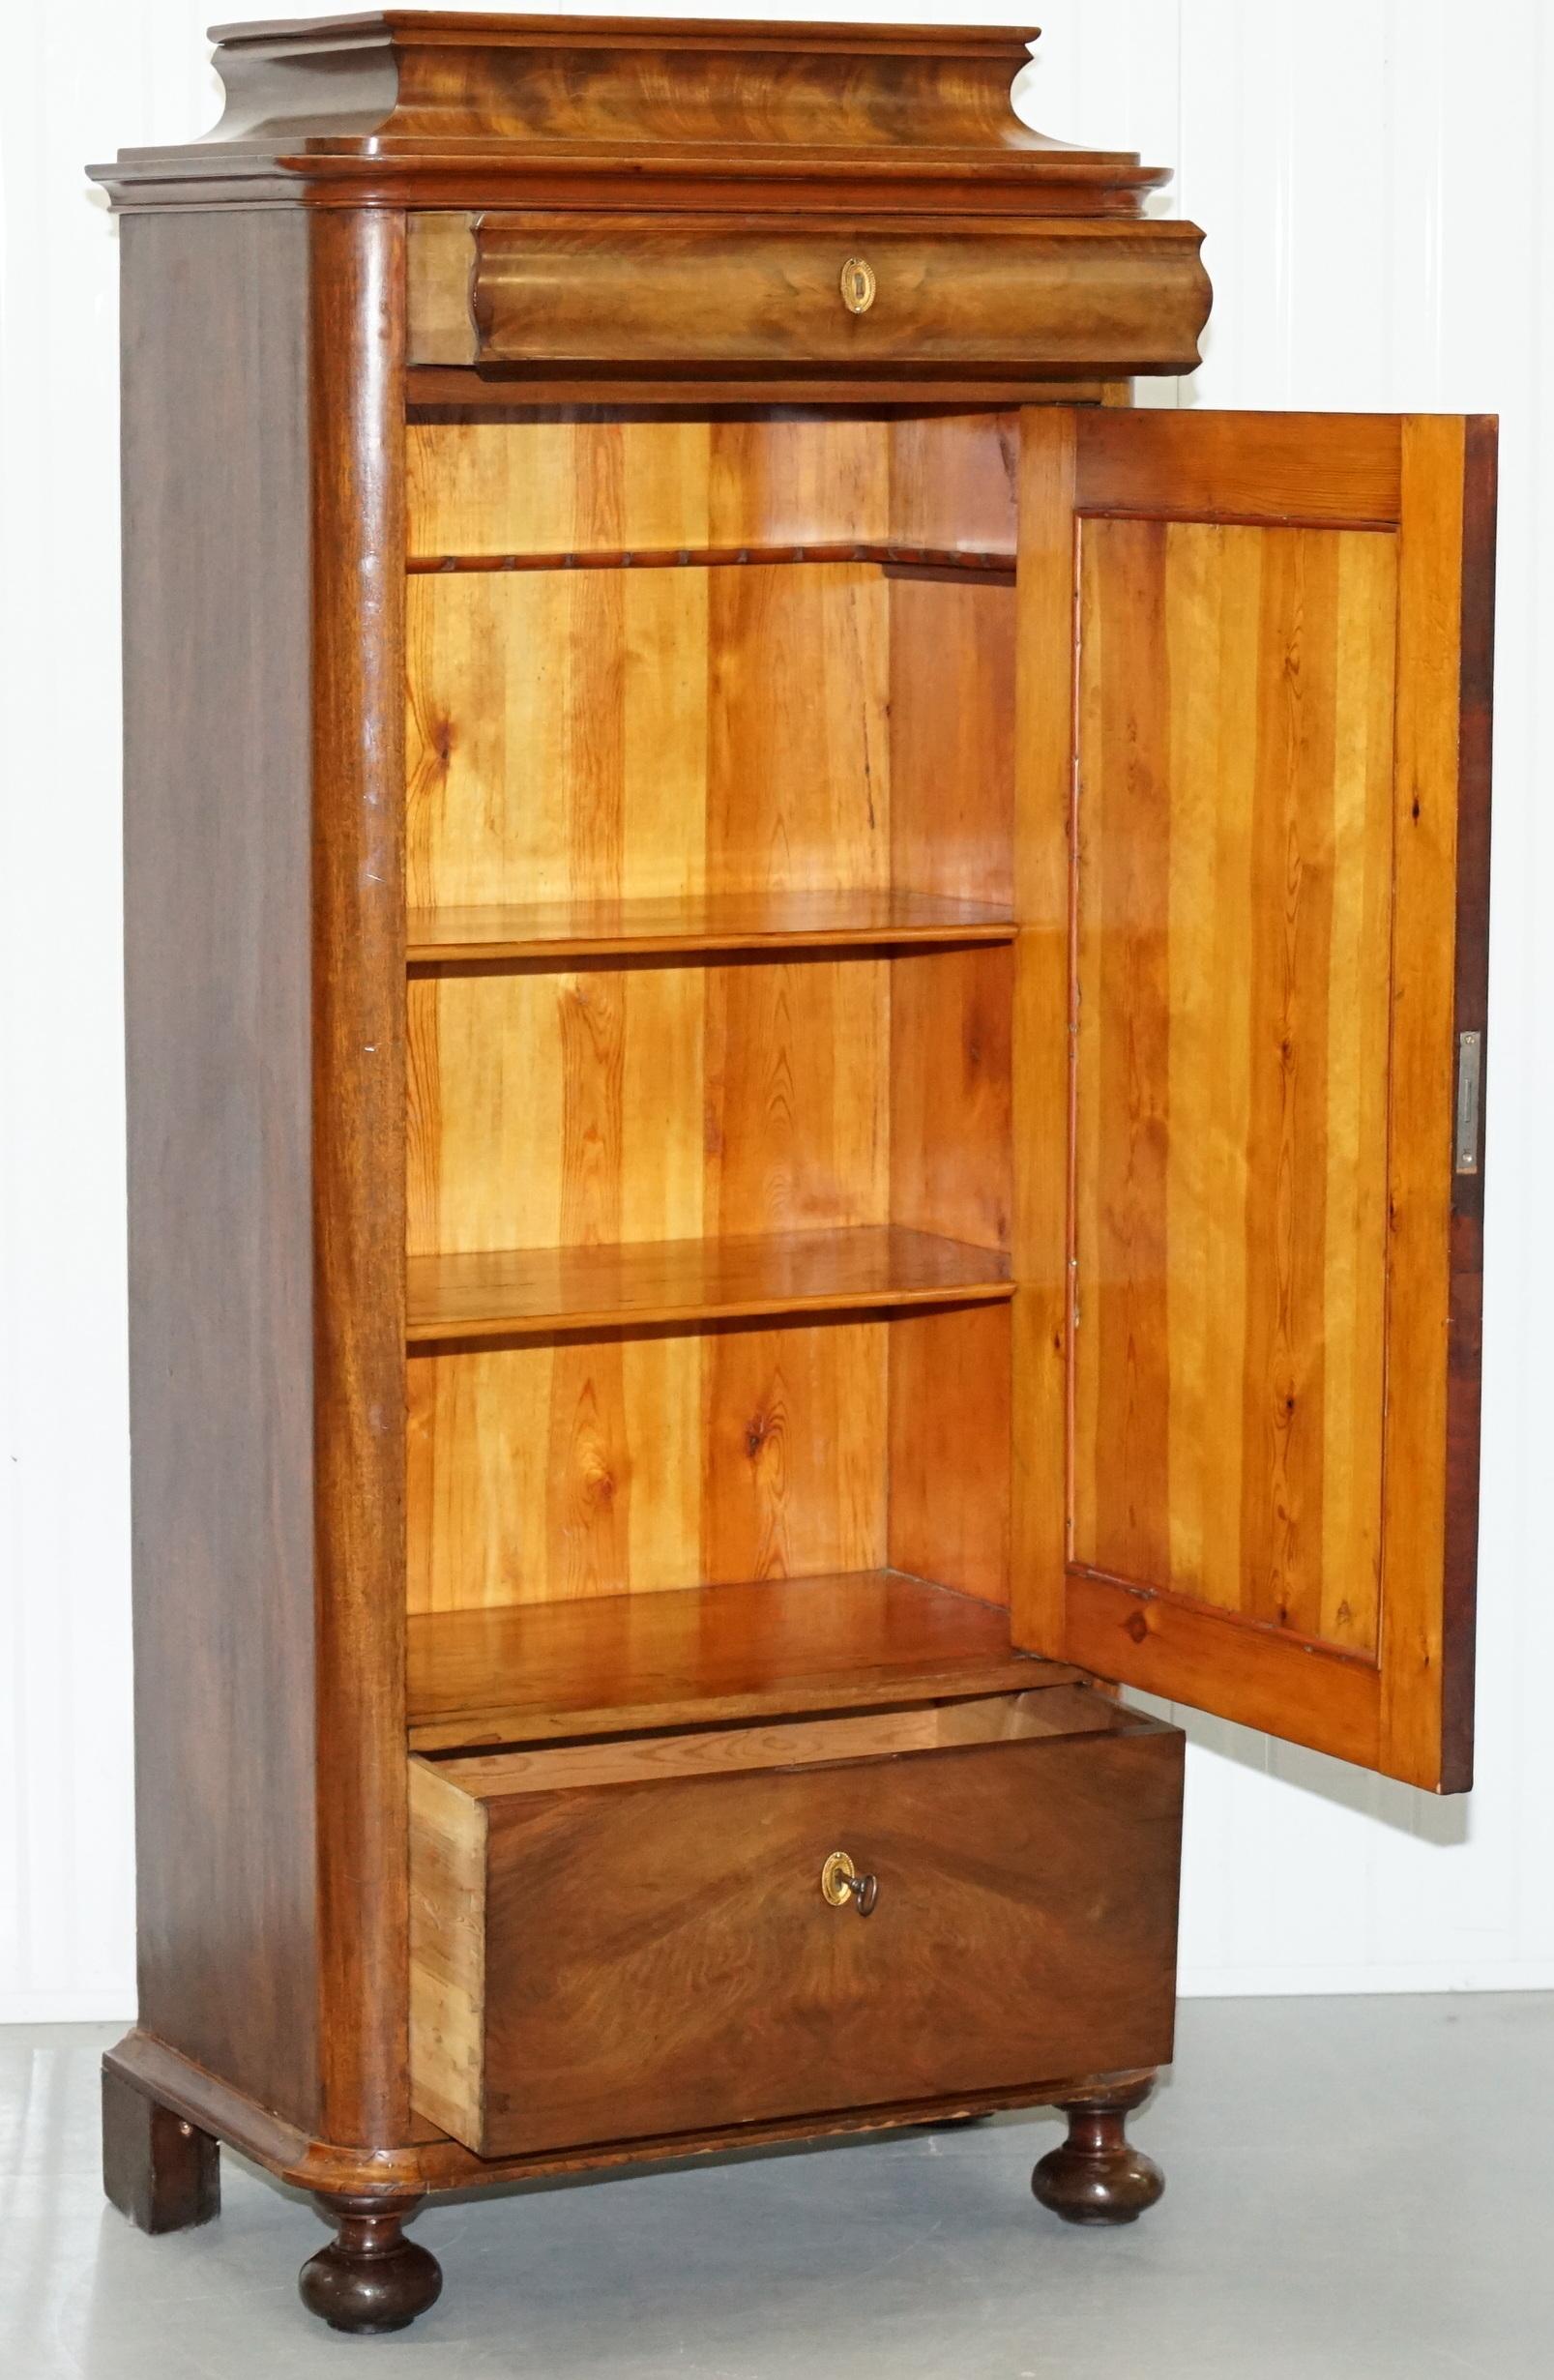 Lovely Walnut Drinks Cabinet with Drawers and Built in Glass Holder Great Find 7